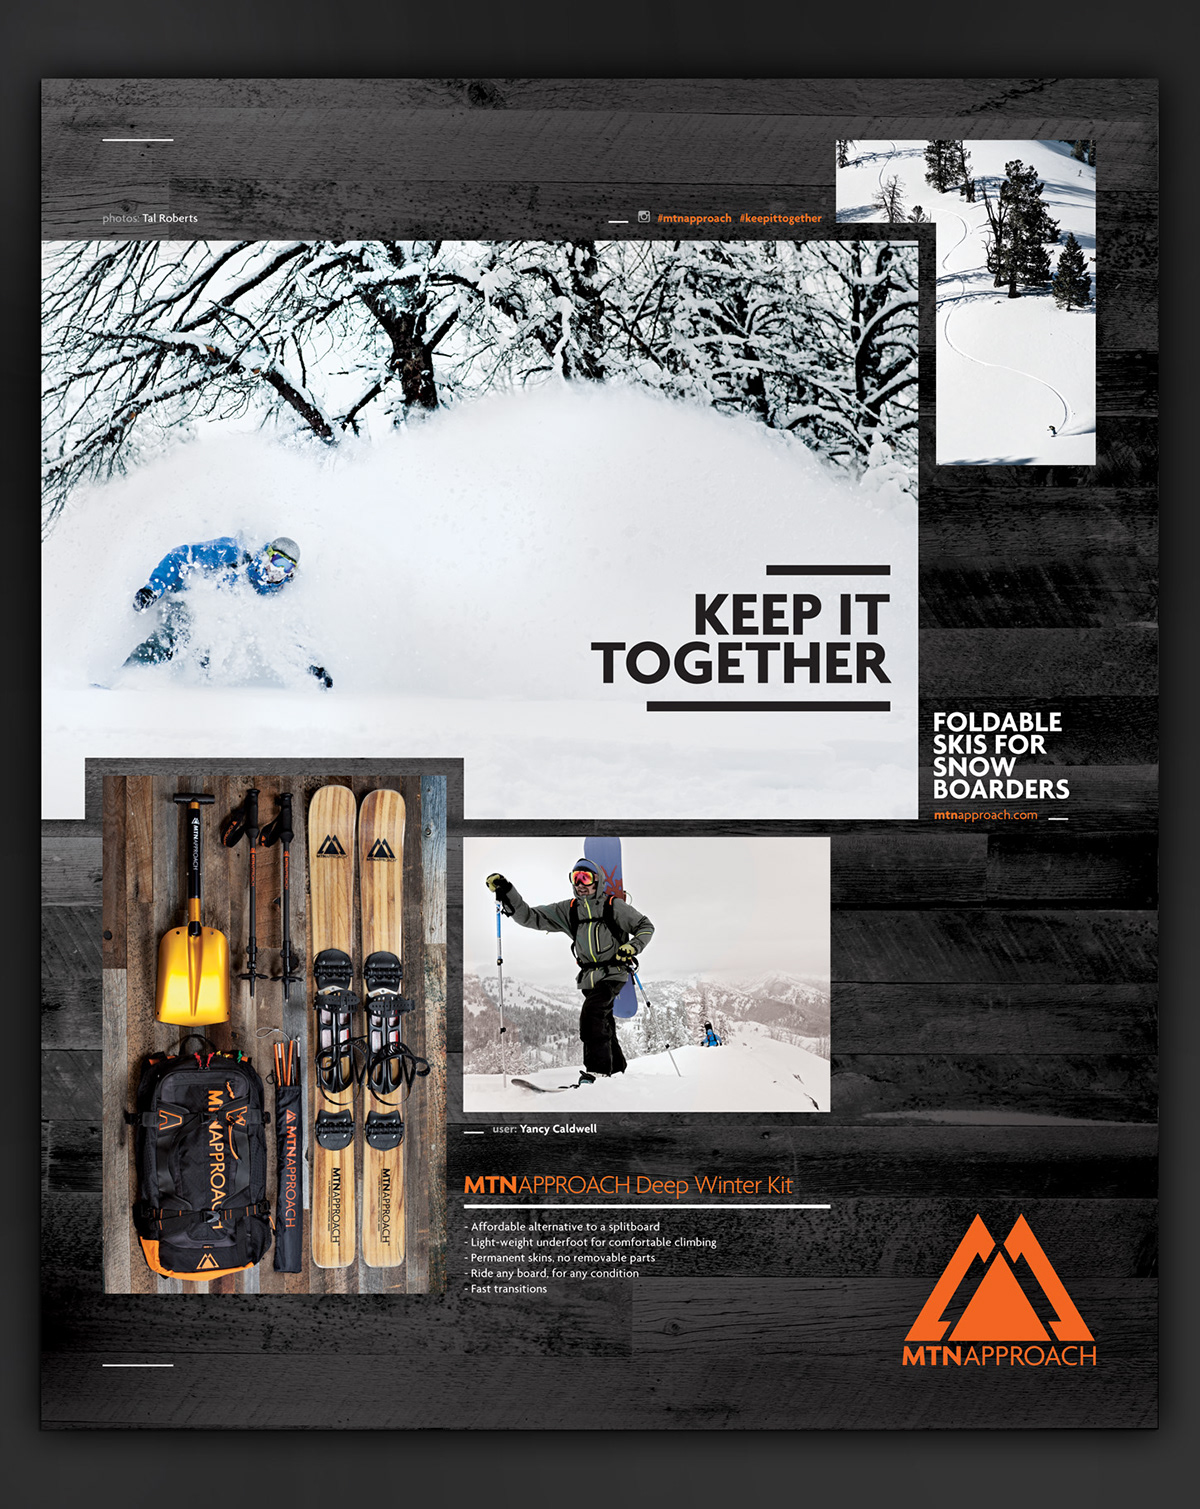 MTNApproach BackCountry Snowboarding Snowboarding wintersports page layout print production